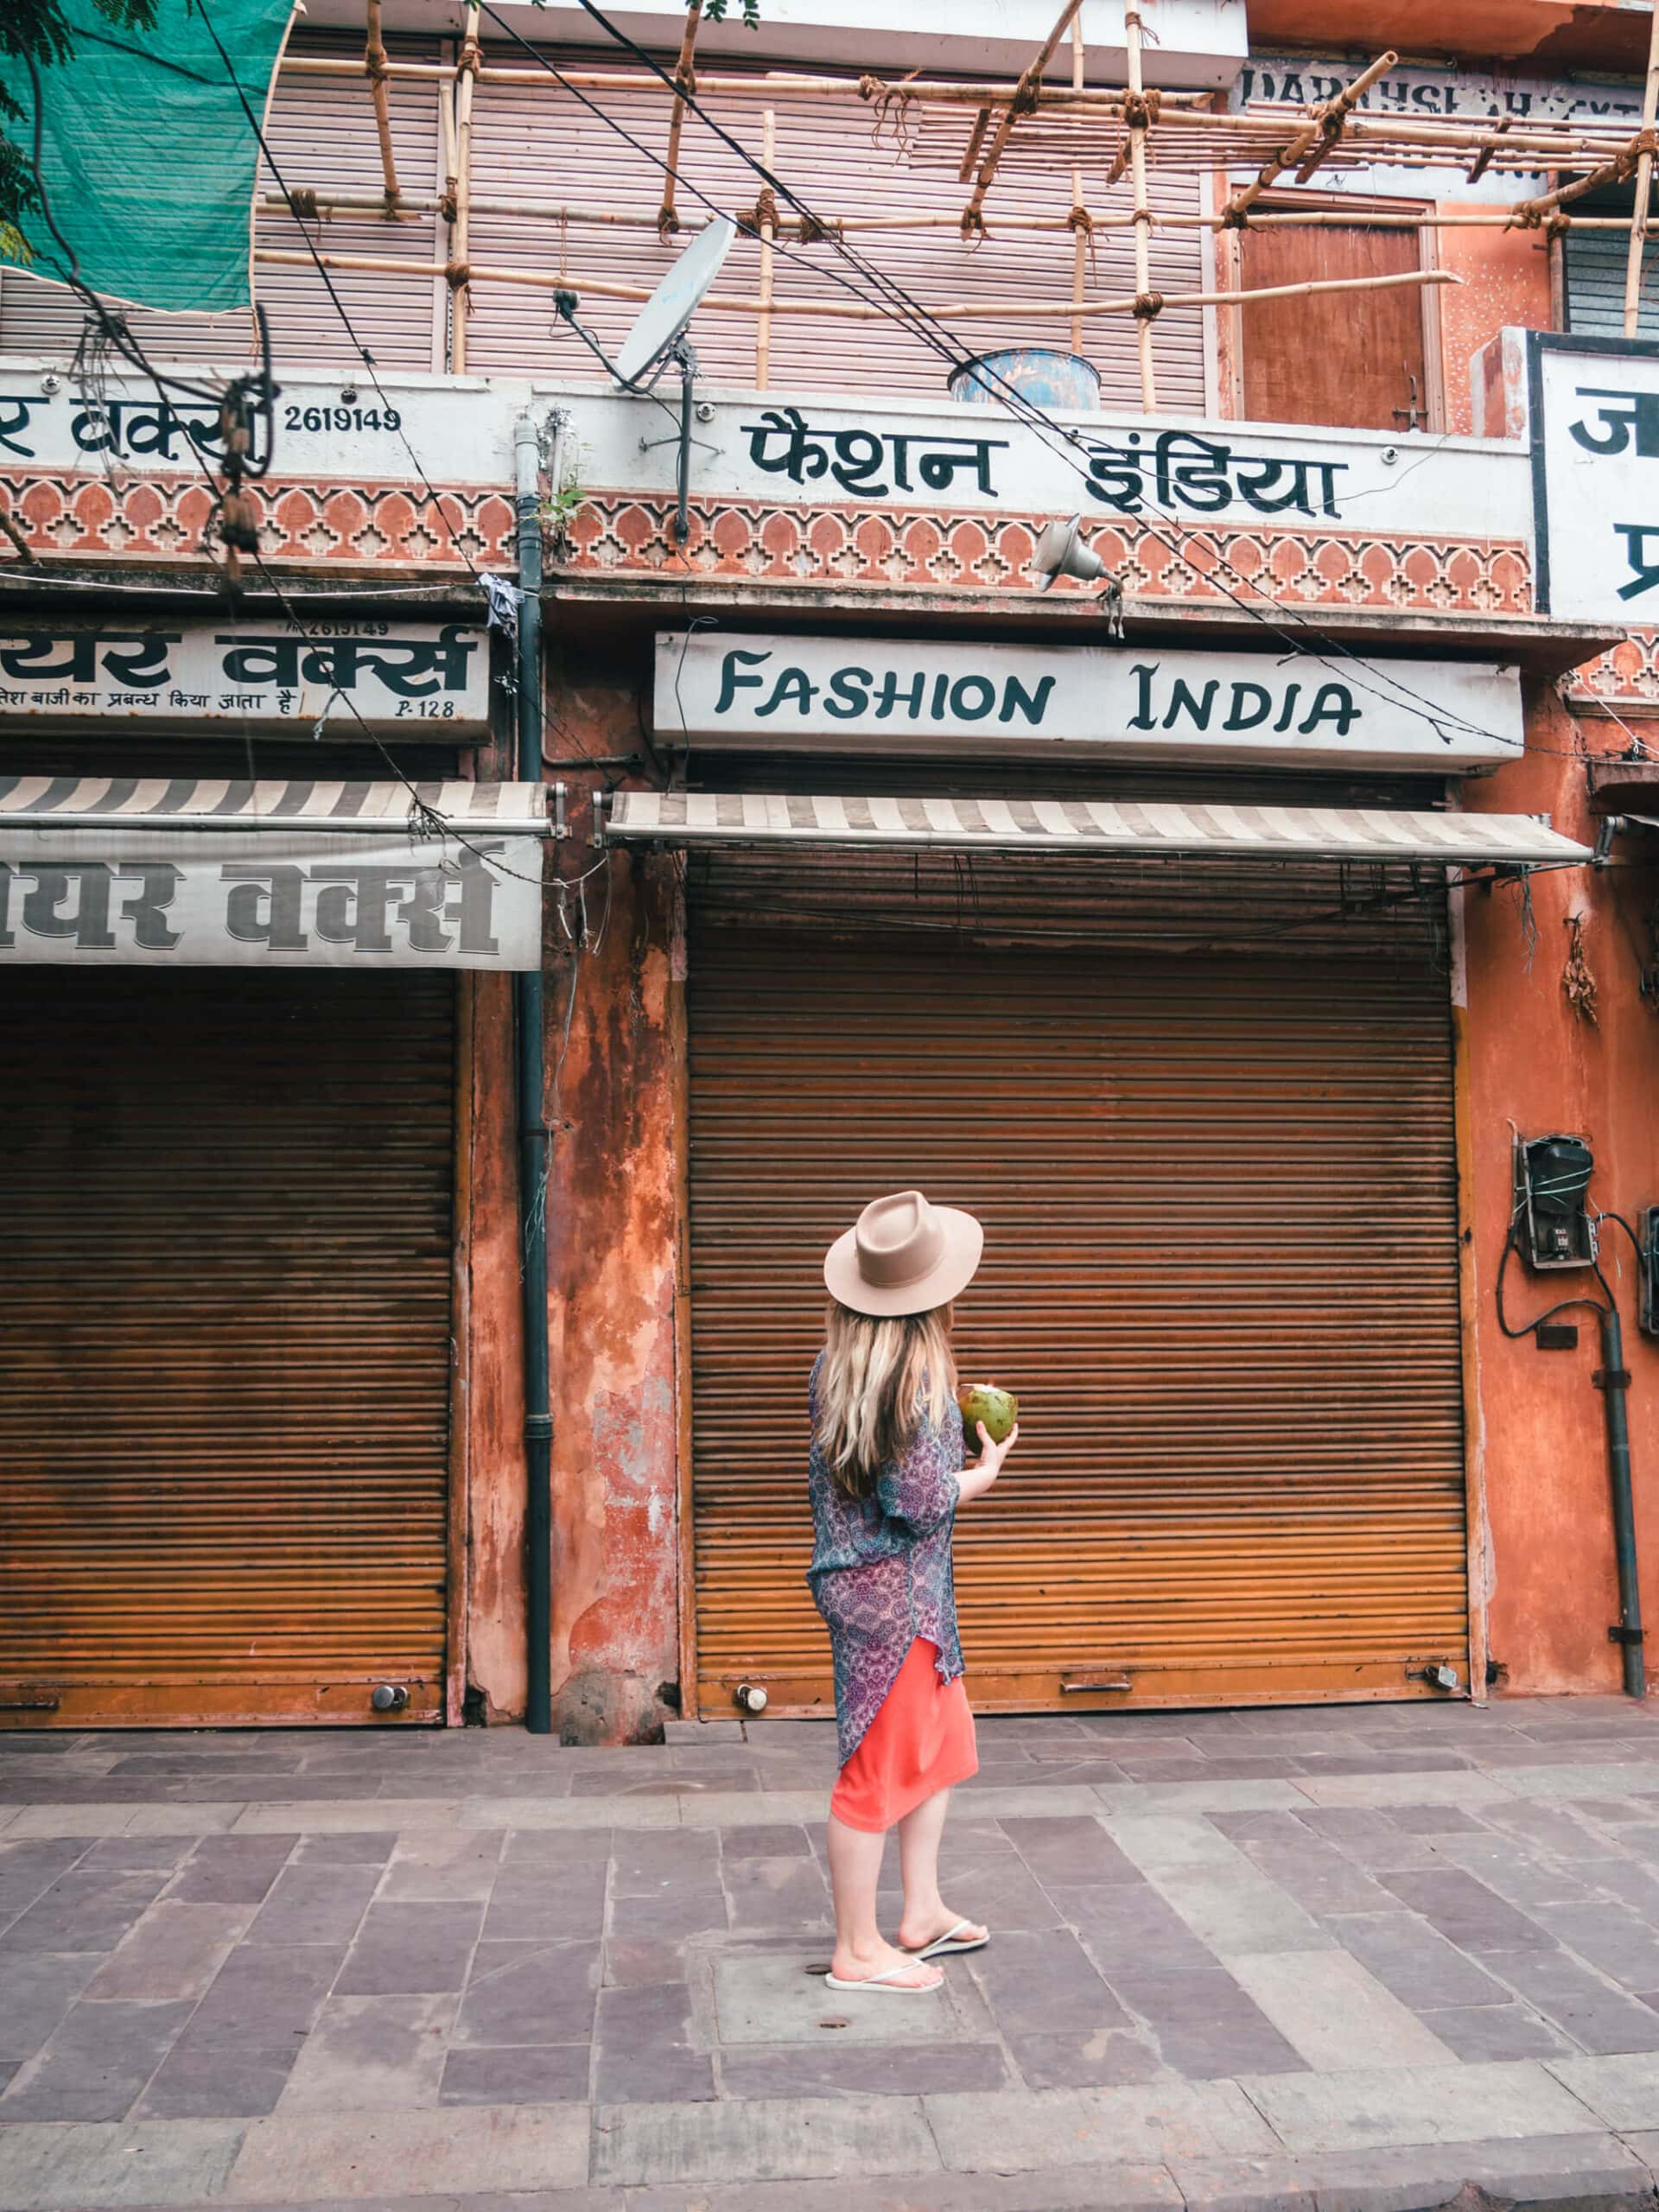 Girl in a coral dress and blue kimono wearing a beige hat and holding a coconut exploring the streets on Jaipur, a must on any 2-day Jaipur itinerary.